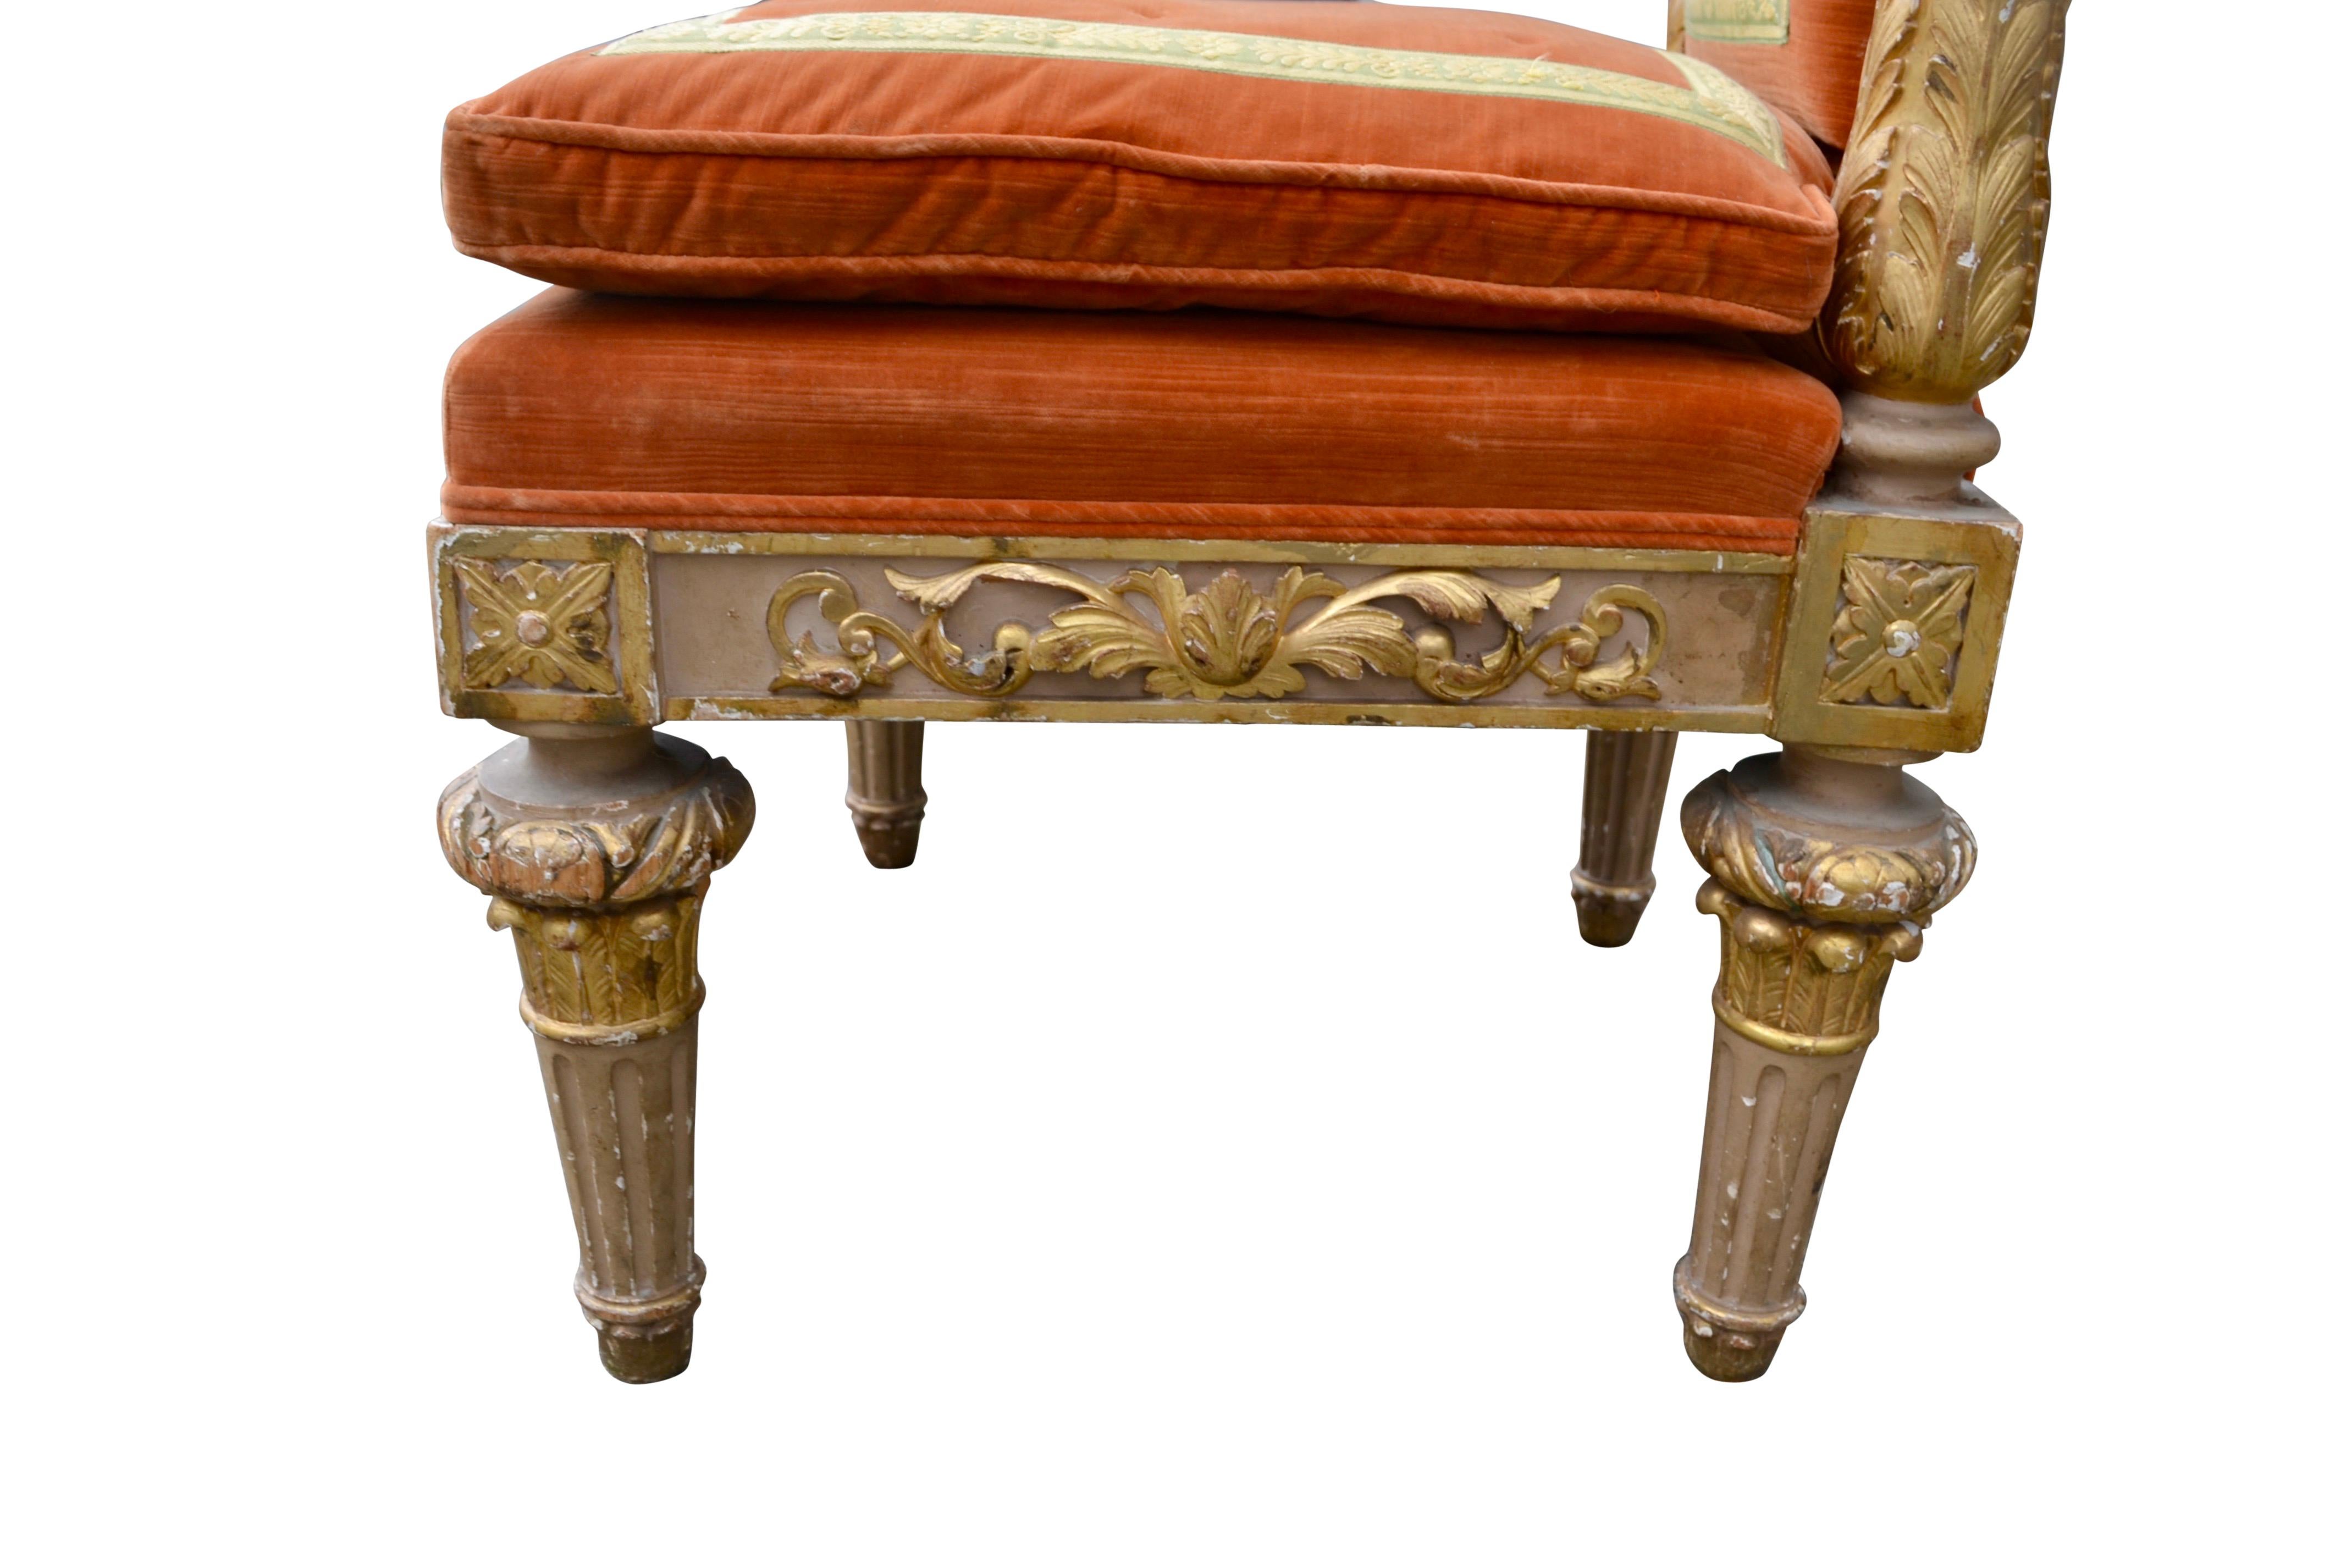 Giltwood 18th C Italian Piedmontese Carved Gilded Chair For Sale